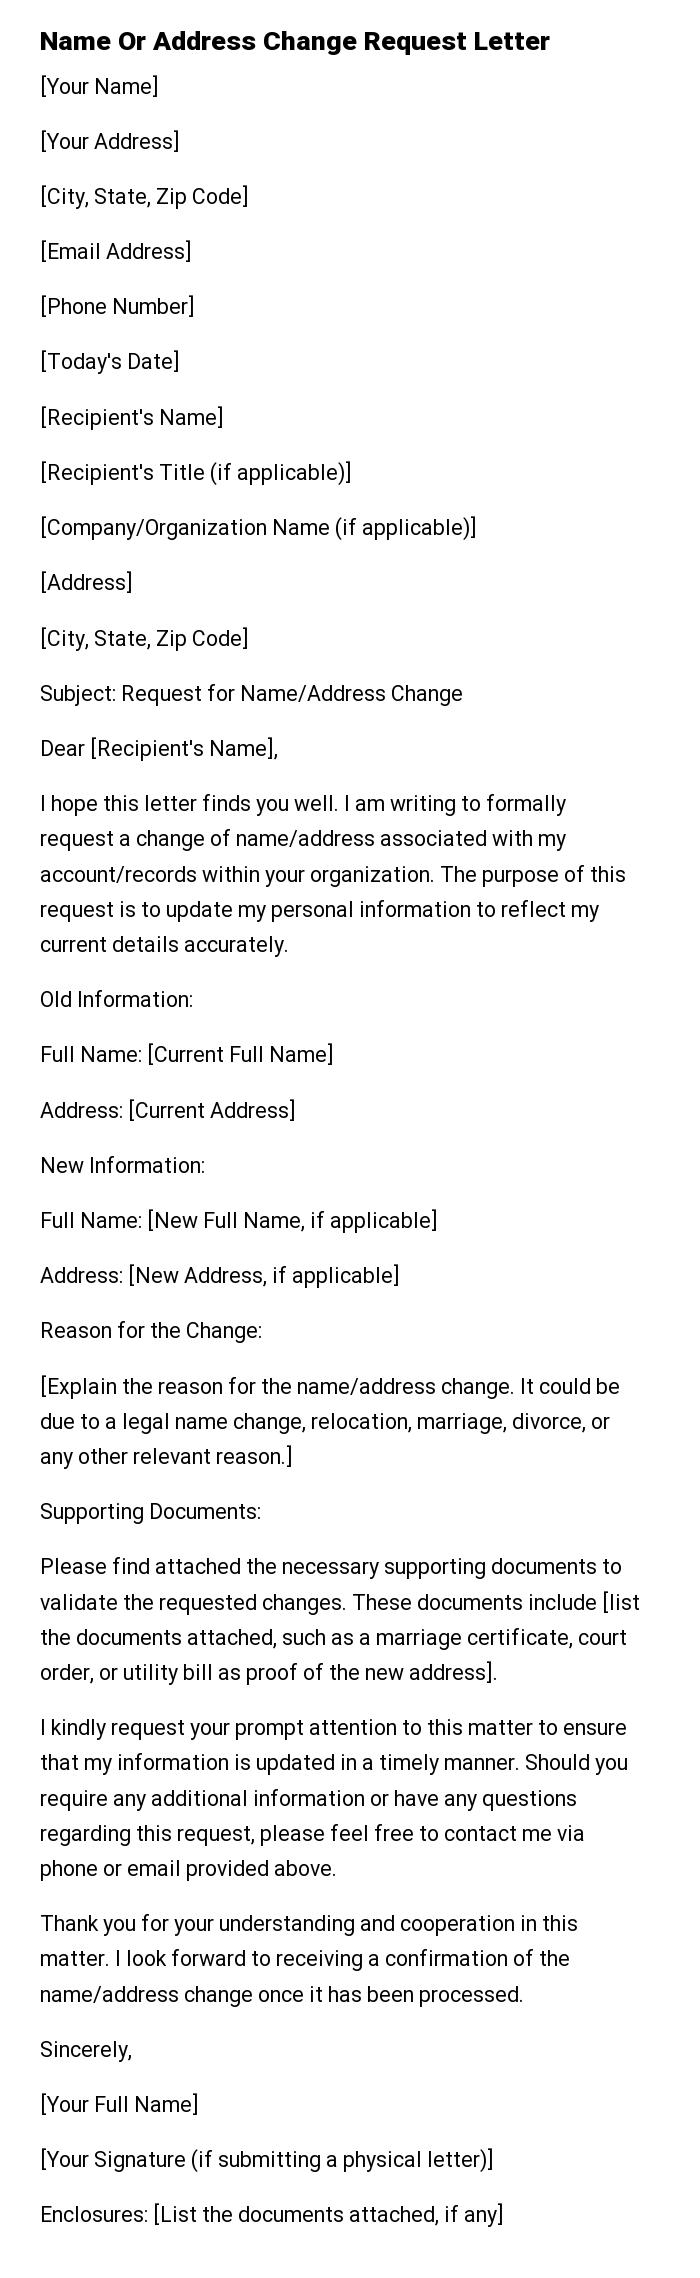 Name Or Address Change Request Letter